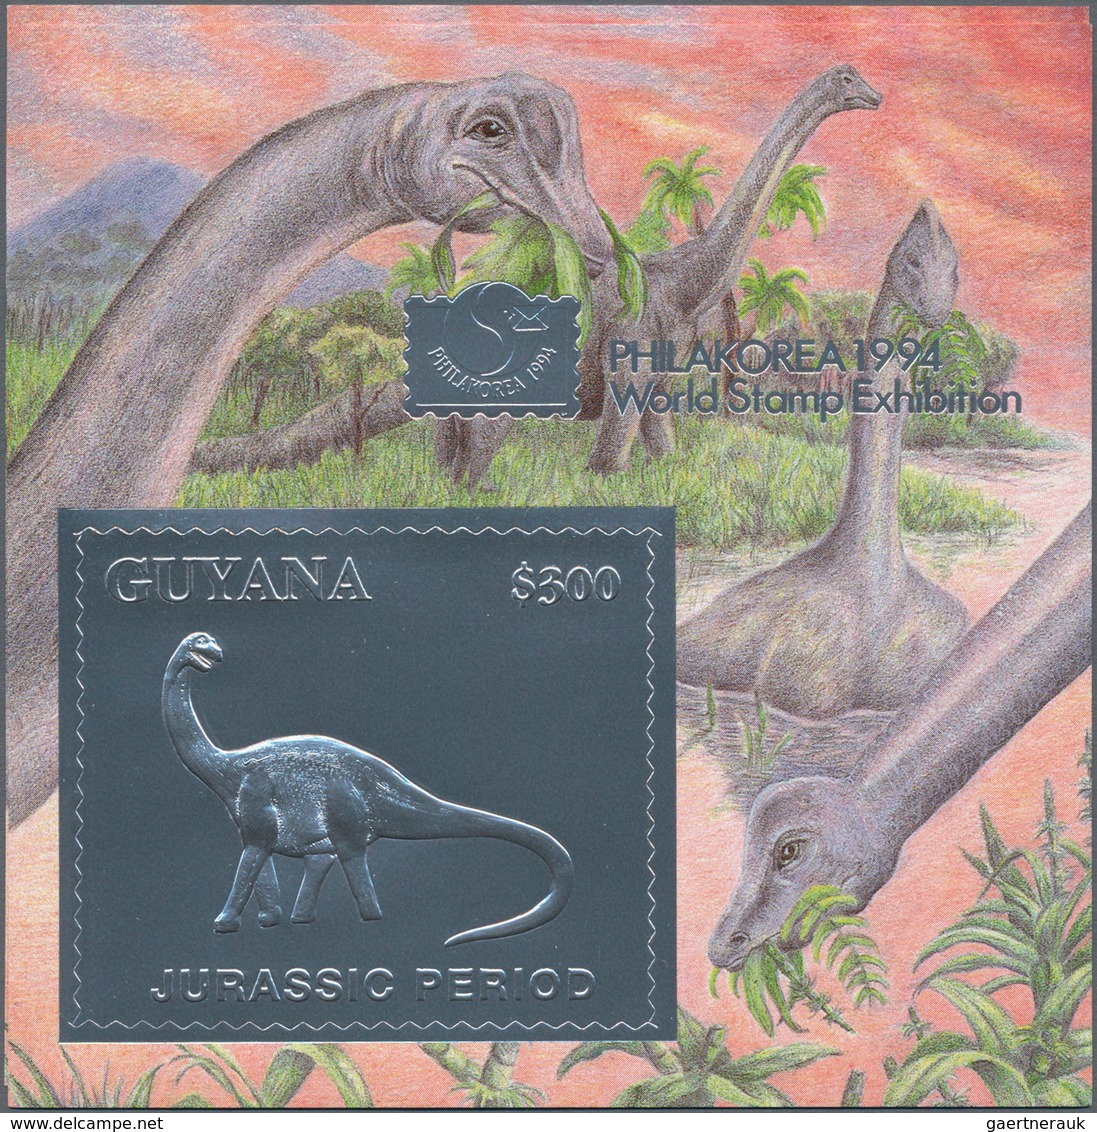 Guyana: 1992/1994, duplicated accumulation in large box with hundreds of GOLD and SILVER issues incl